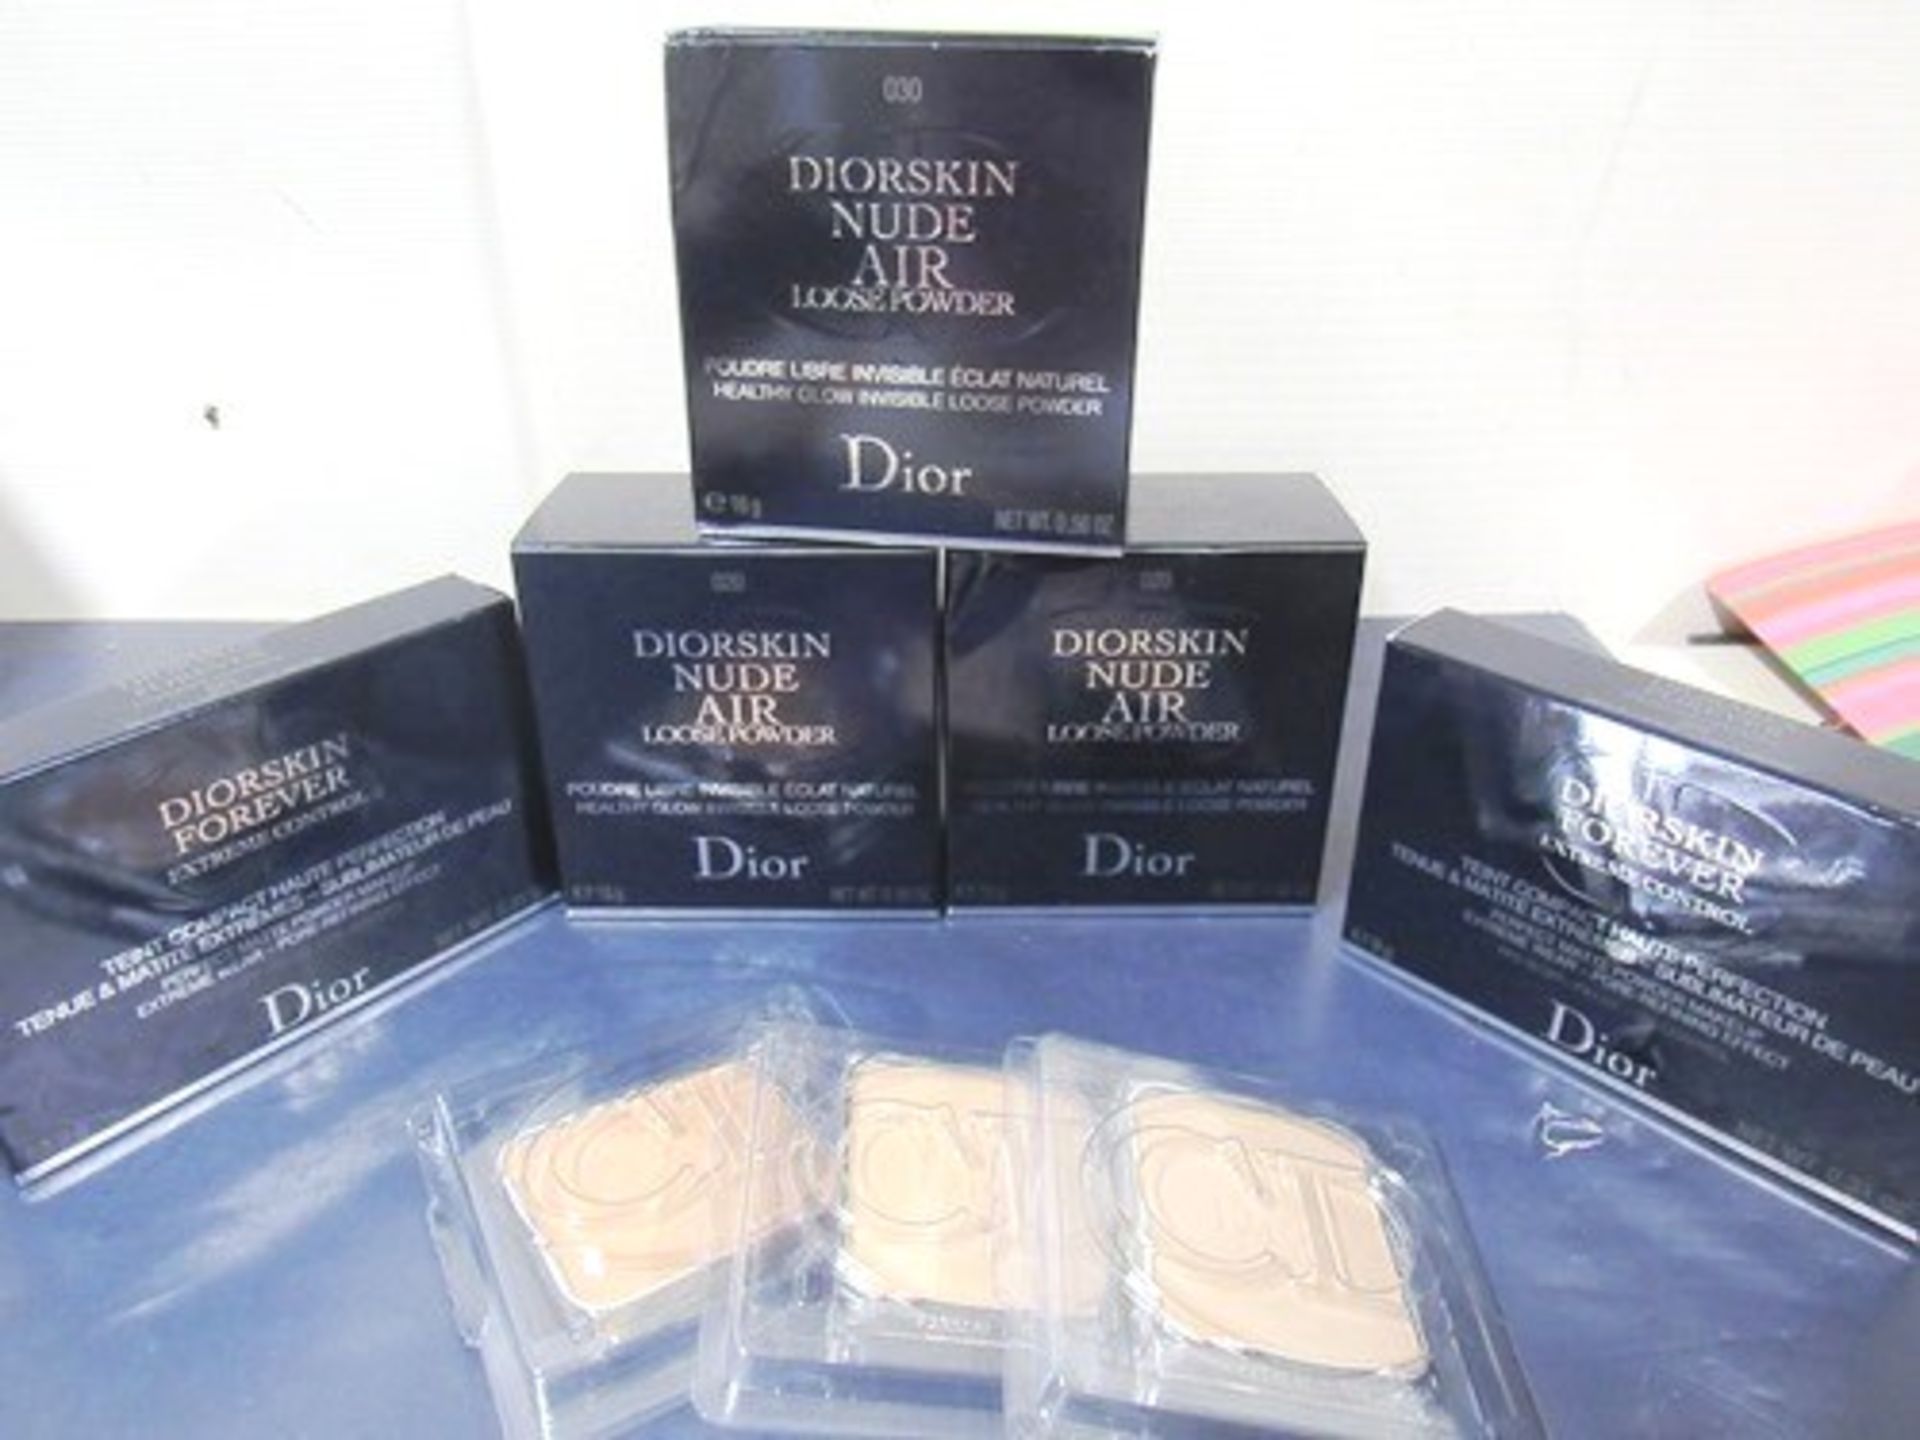 3 x 16g Dior Nude Air loose powder, 3 x Dior Forever extreme control and 3 x refills - New in box (